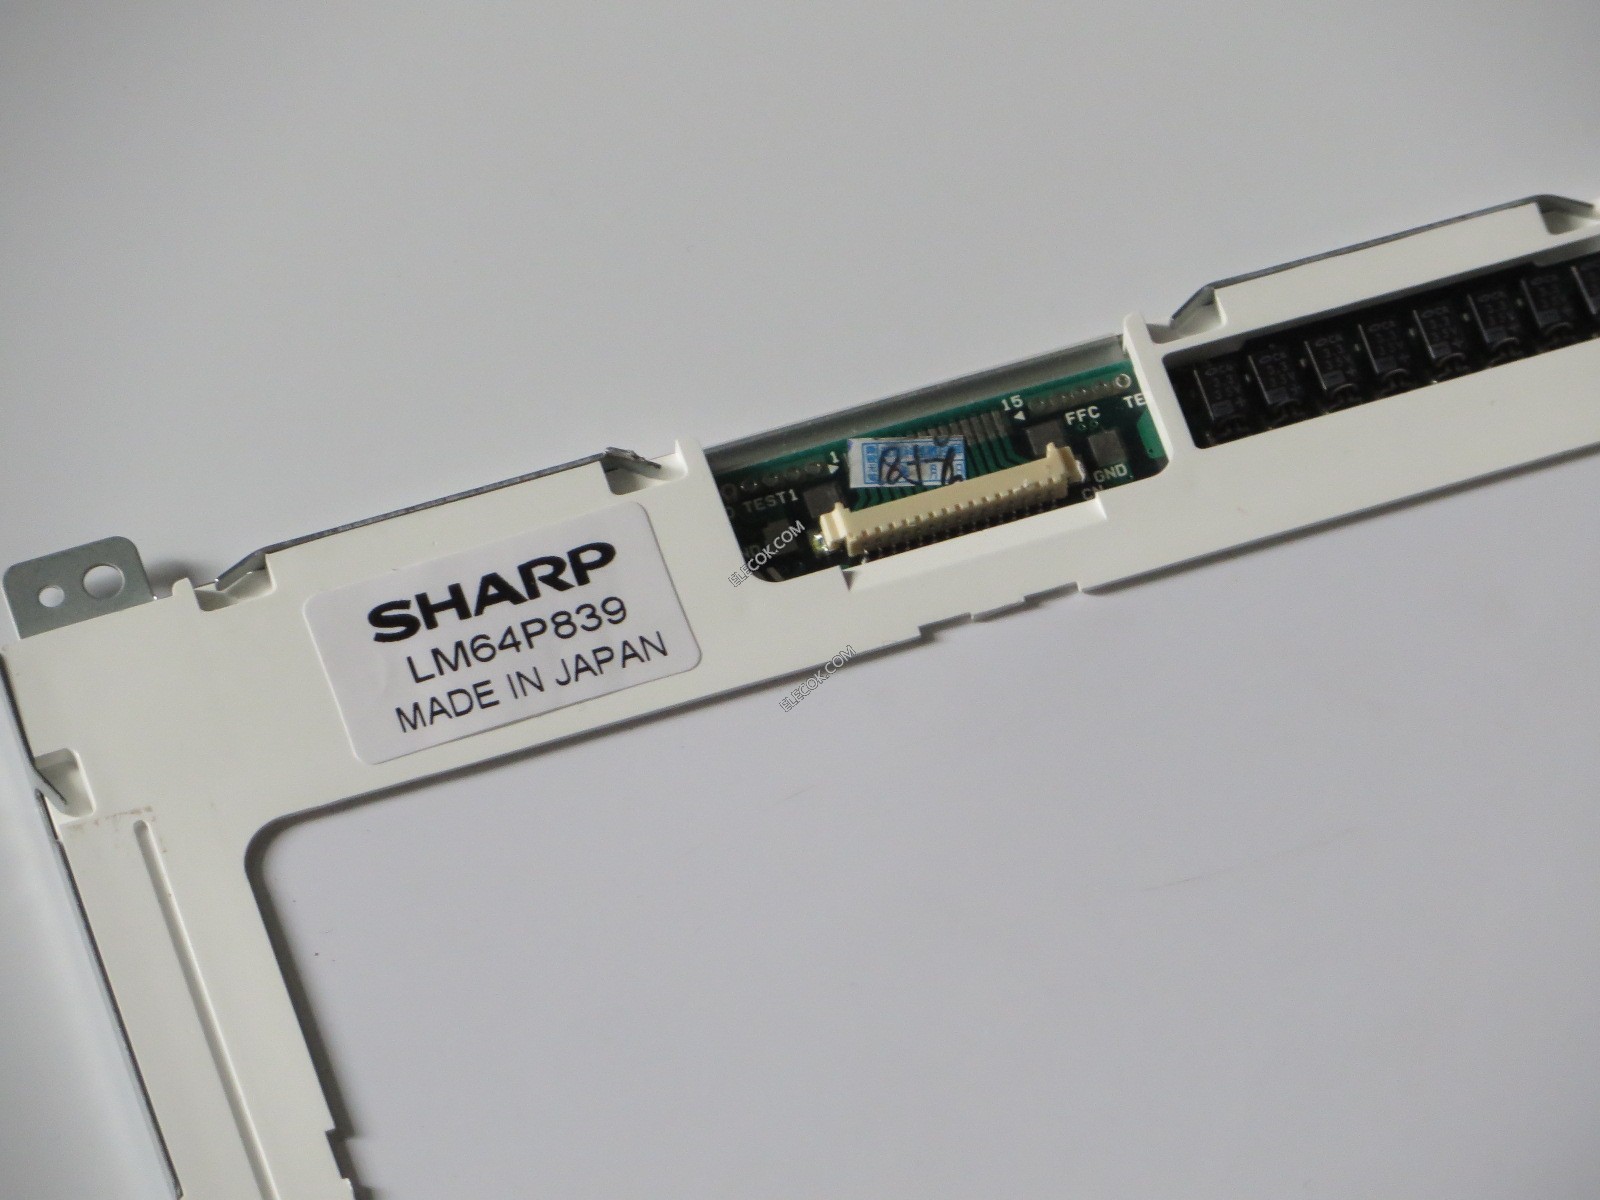 Details about   NEW FOR SHARP LM64P839 9.4-inch 640*480 LCD display panel 90 DAYS WARRANTY